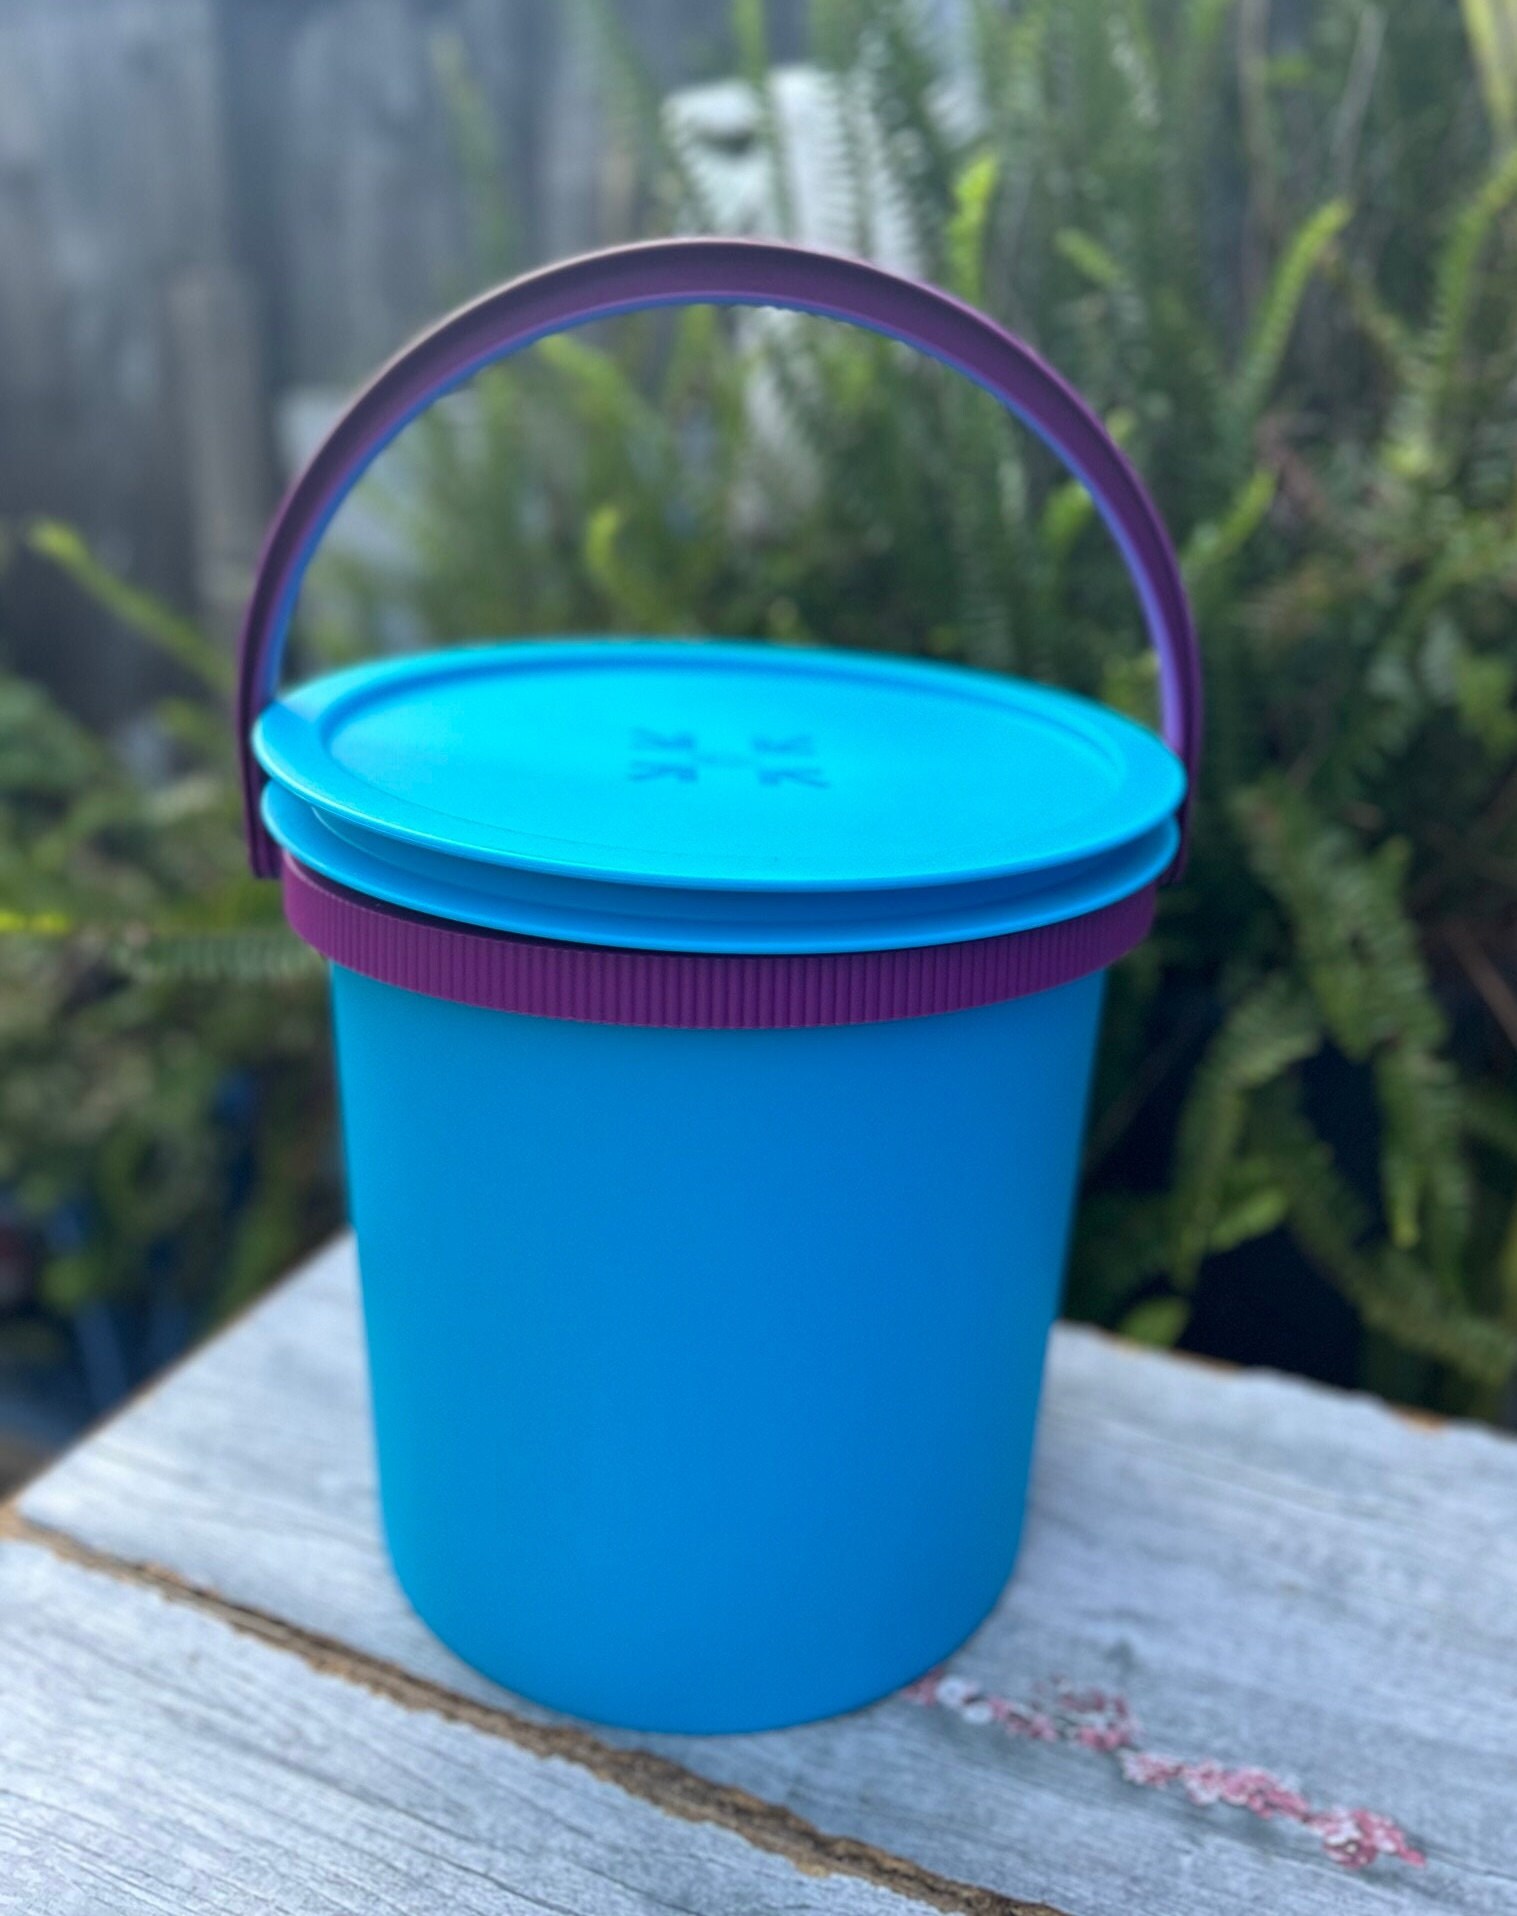 TUPPERWARE NEW JUMBO BUCKET CANISTER 14 L-IN PURPLE WITH HANDLE COLOR !!!!